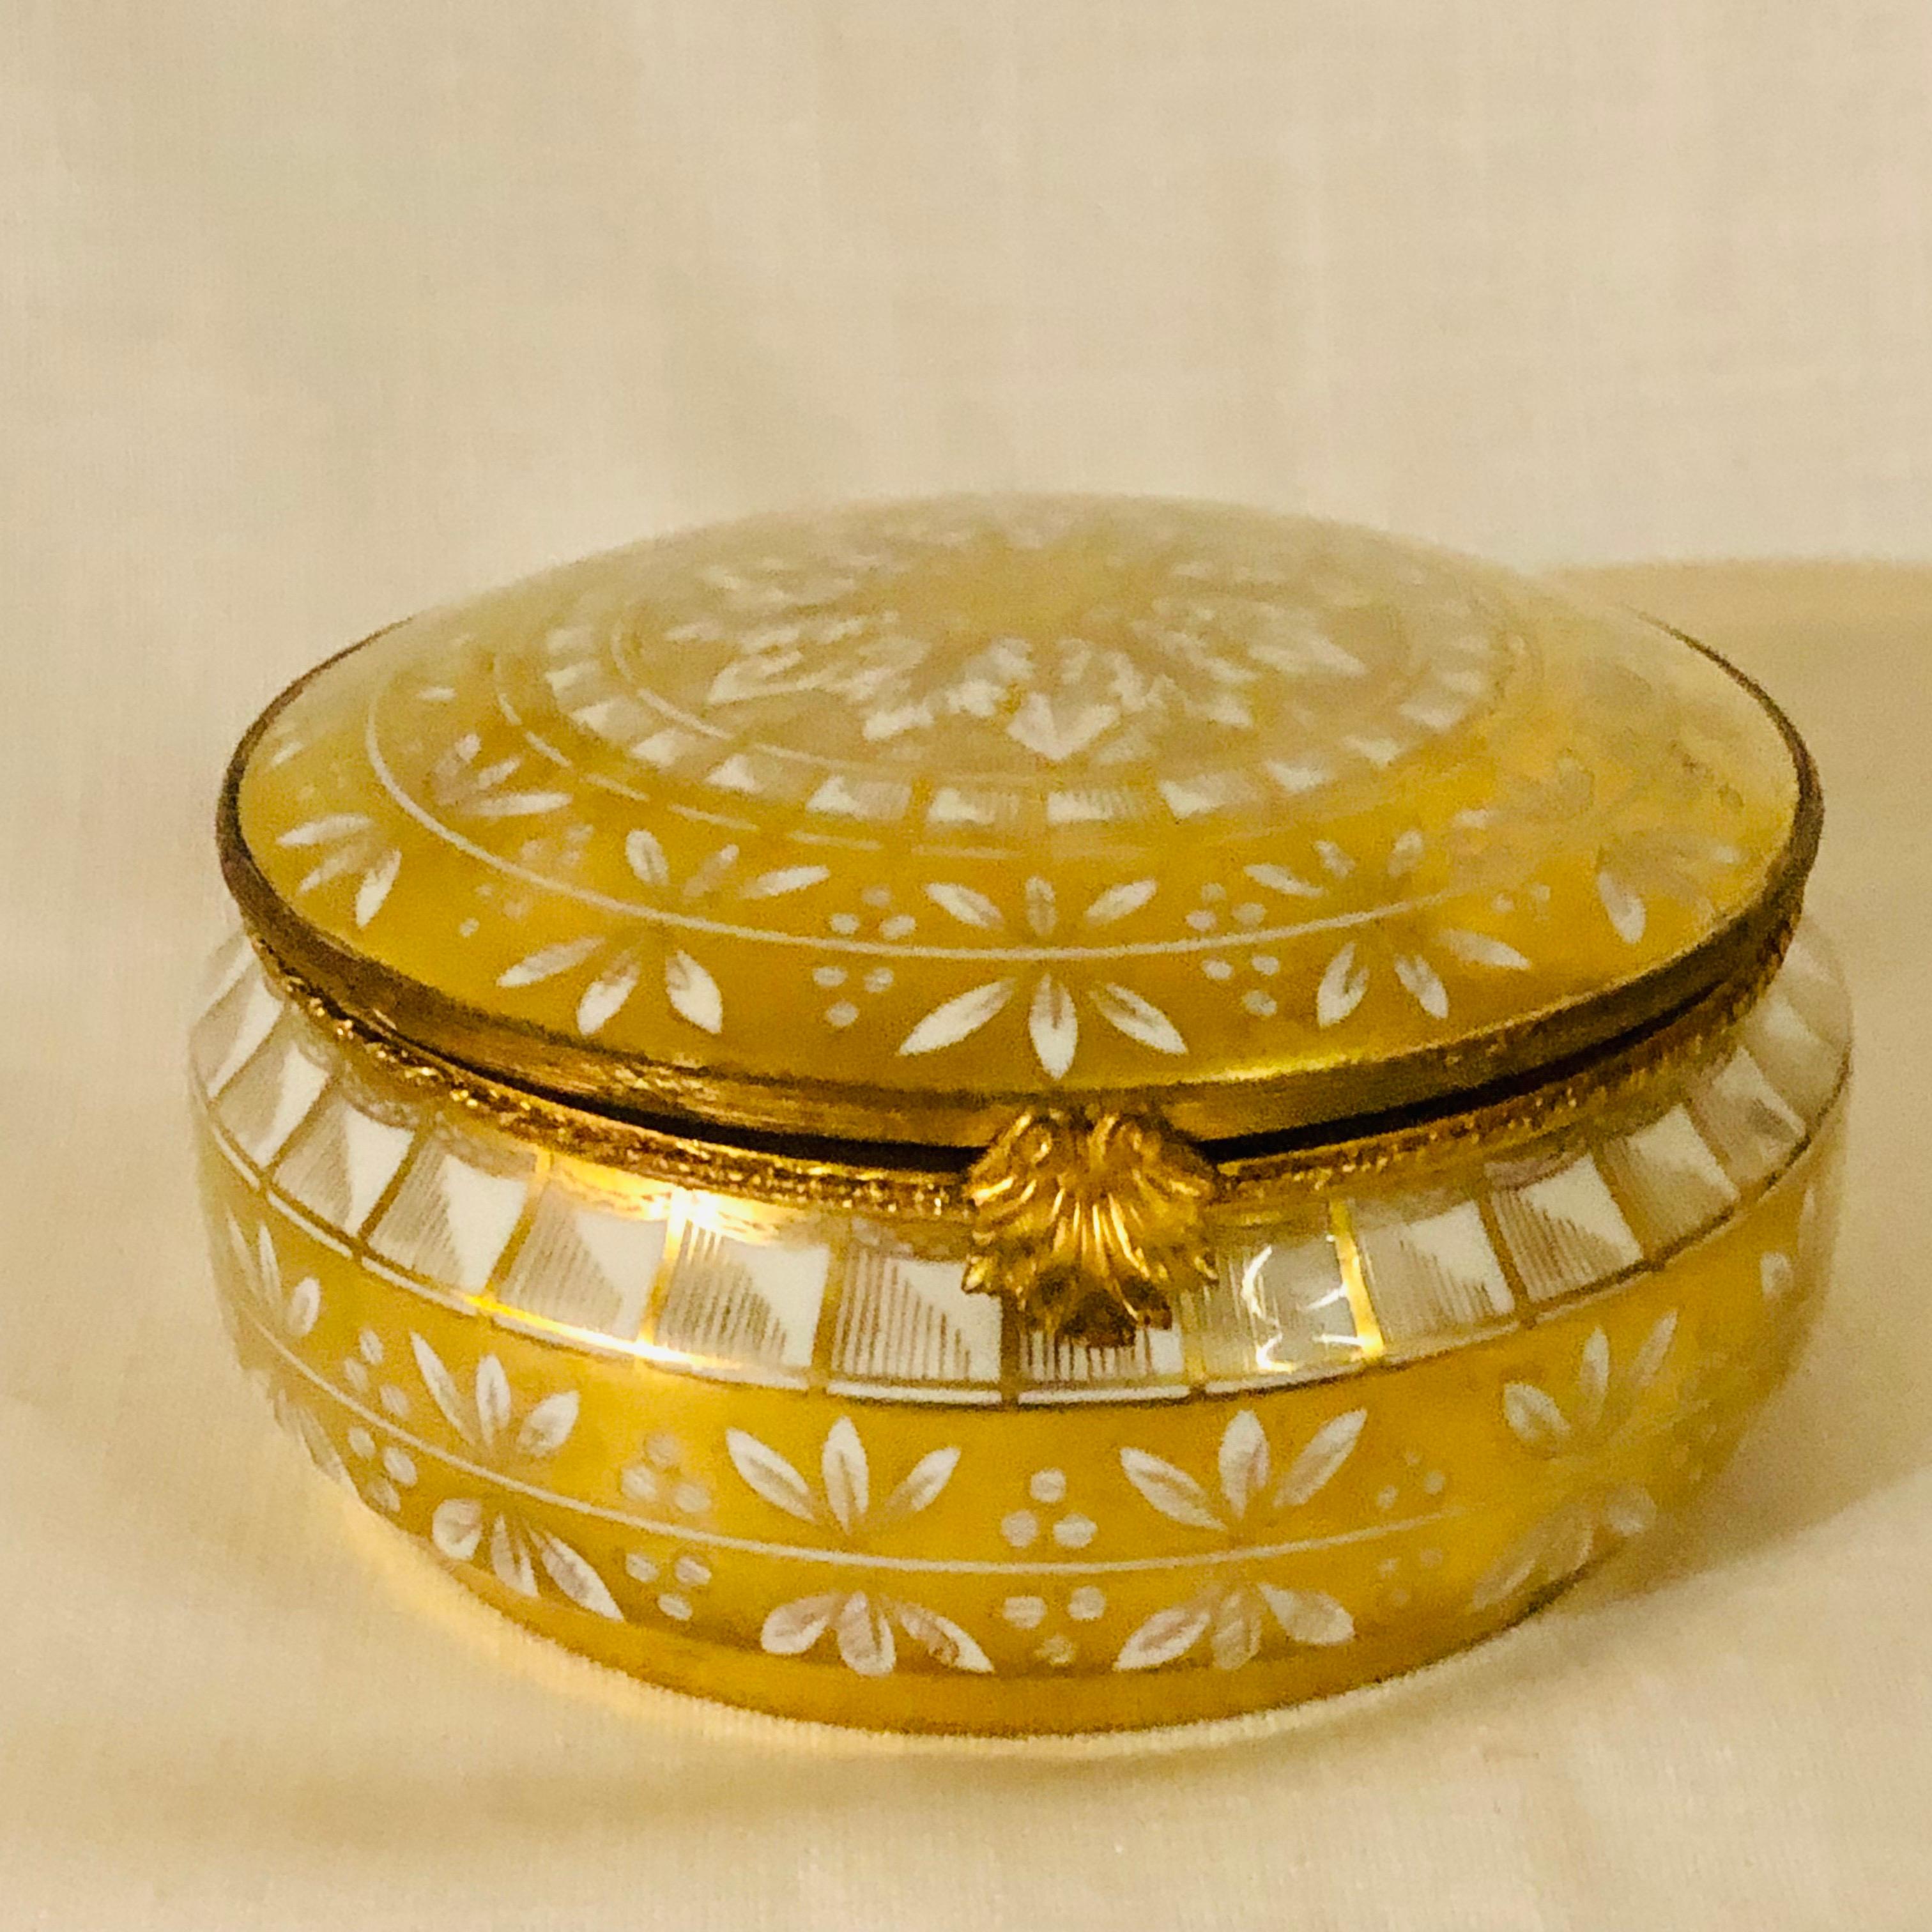 Rococo Le Tallec Porcelain Box with Gold Painted Decoration on a White Porcelain Ground